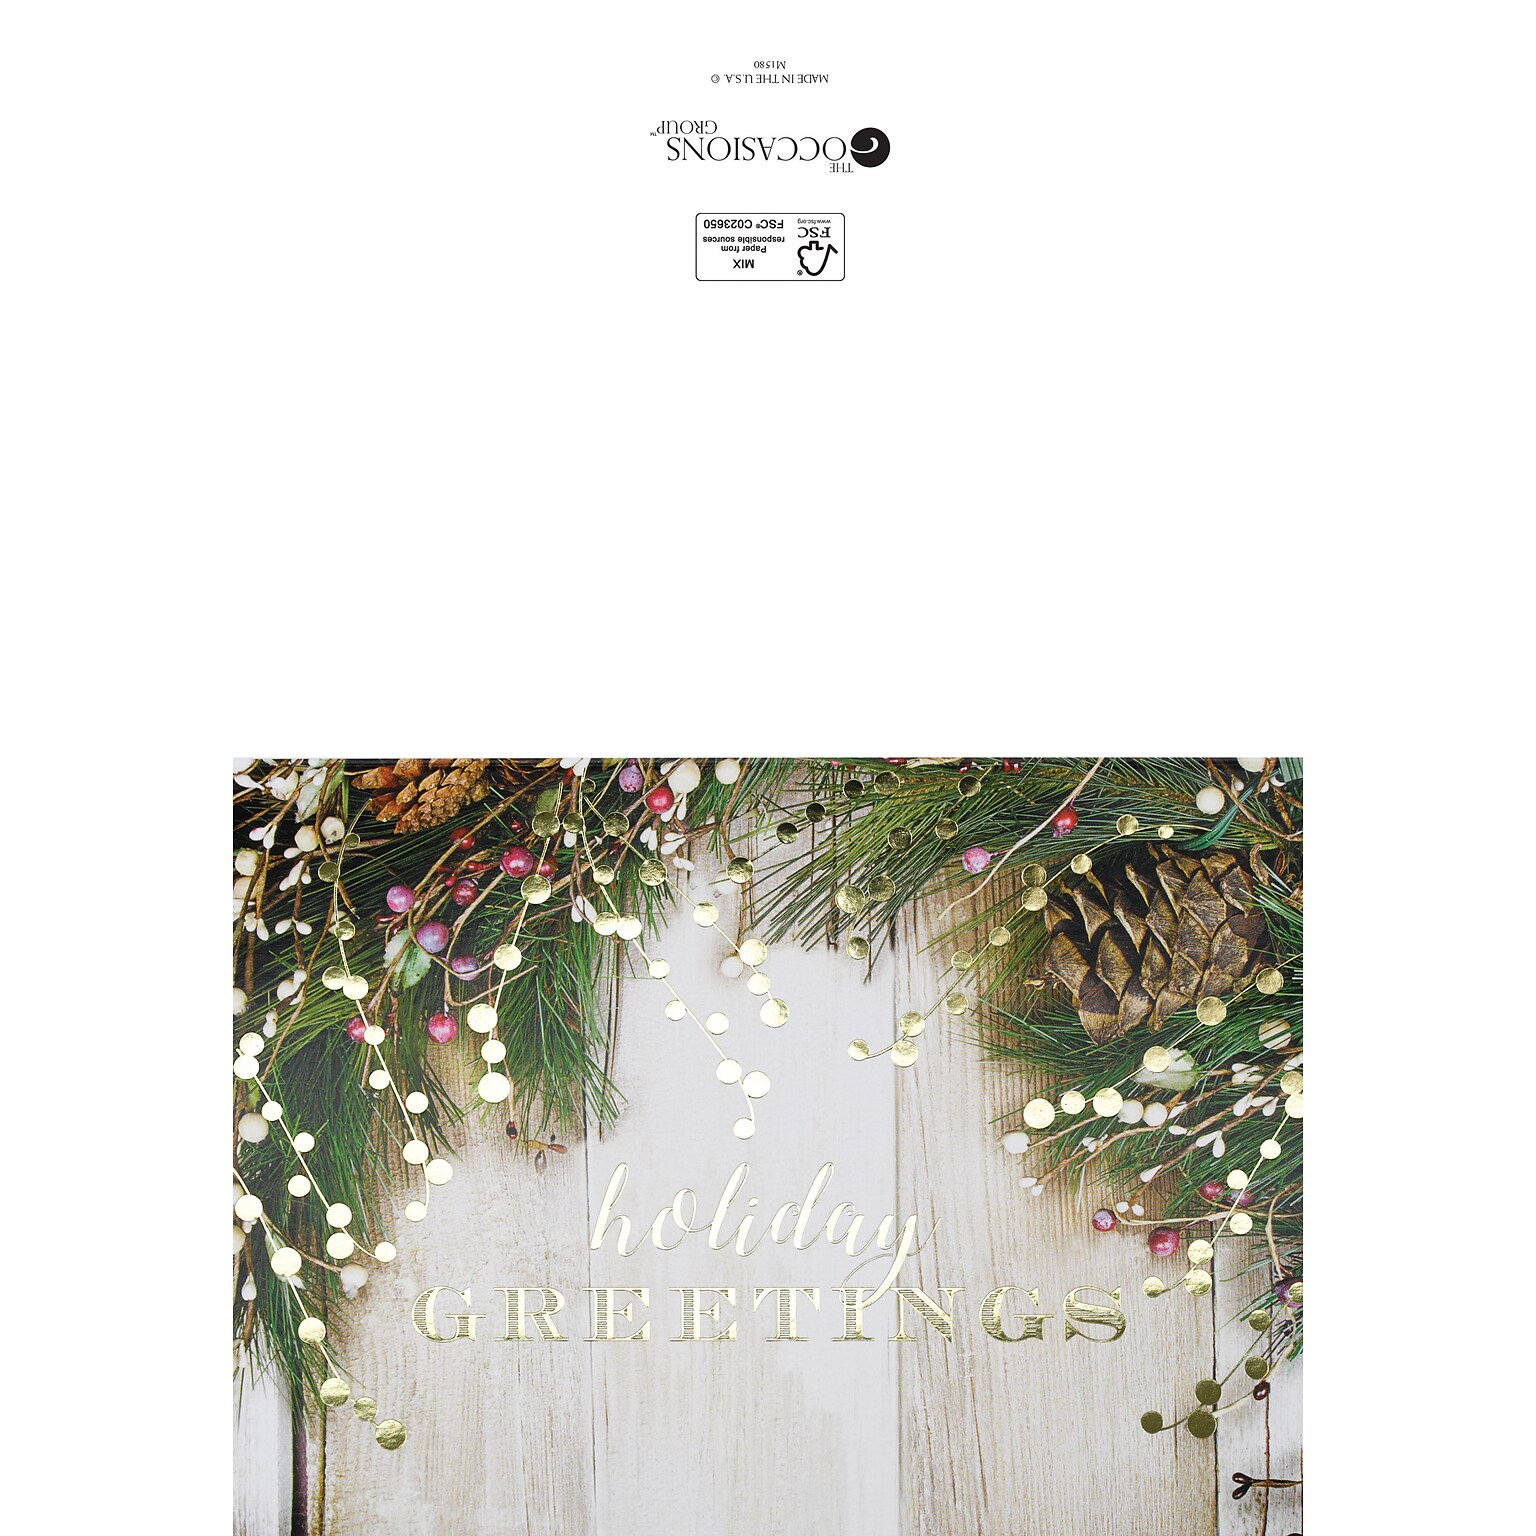 Custom Holiday Greetings Wood Panel Cards, with Envelopes, 7-7/8 x 5-5/8, 25 Cards per Set